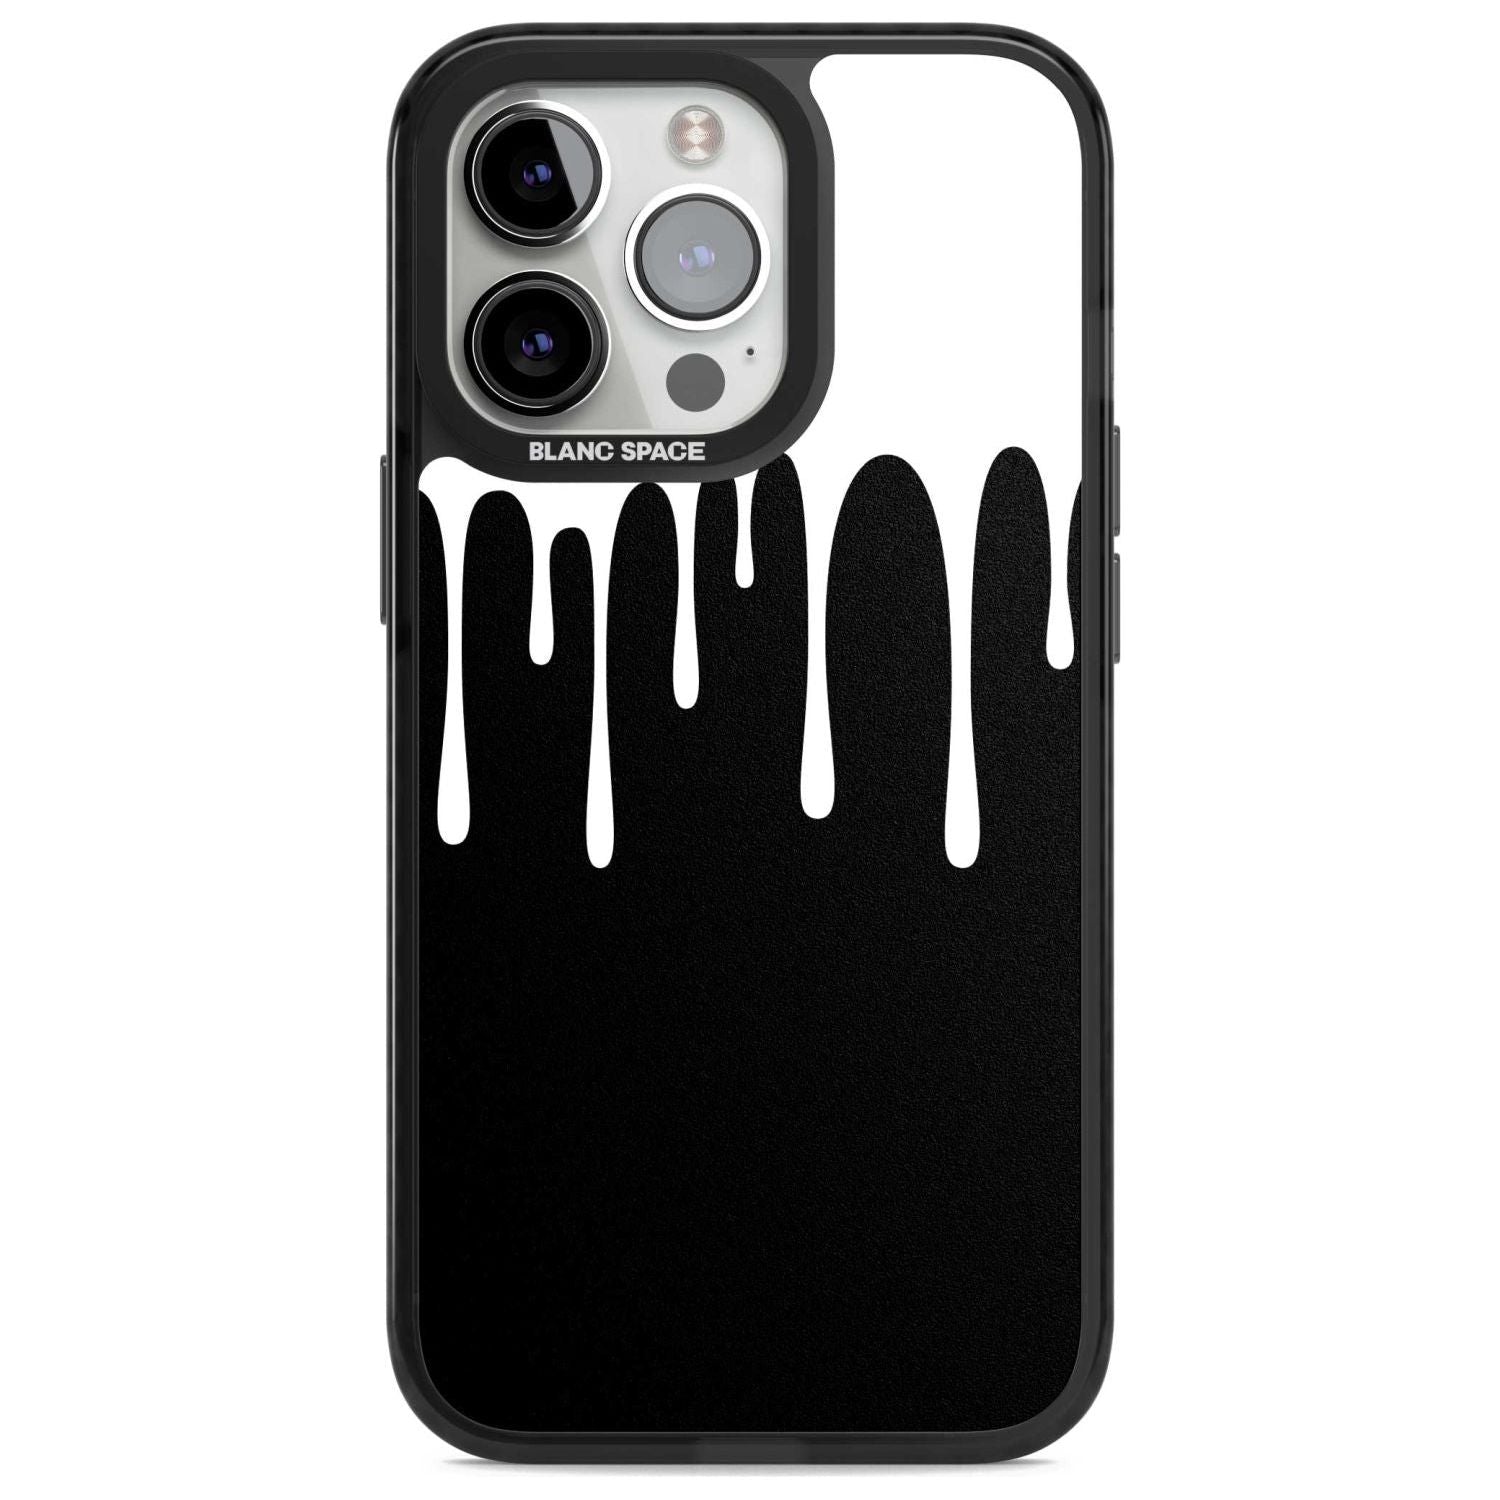 Melted Effect: White & Black Phone Case iPhone 15 Pro Max / Magsafe Black Impact Case,iPhone 15 Pro / Magsafe Black Impact Case,iPhone 14 Pro Max / Magsafe Black Impact Case,iPhone 14 Pro / Magsafe Black Impact Case,iPhone 13 Pro / Magsafe Black Impact Case Blanc Space